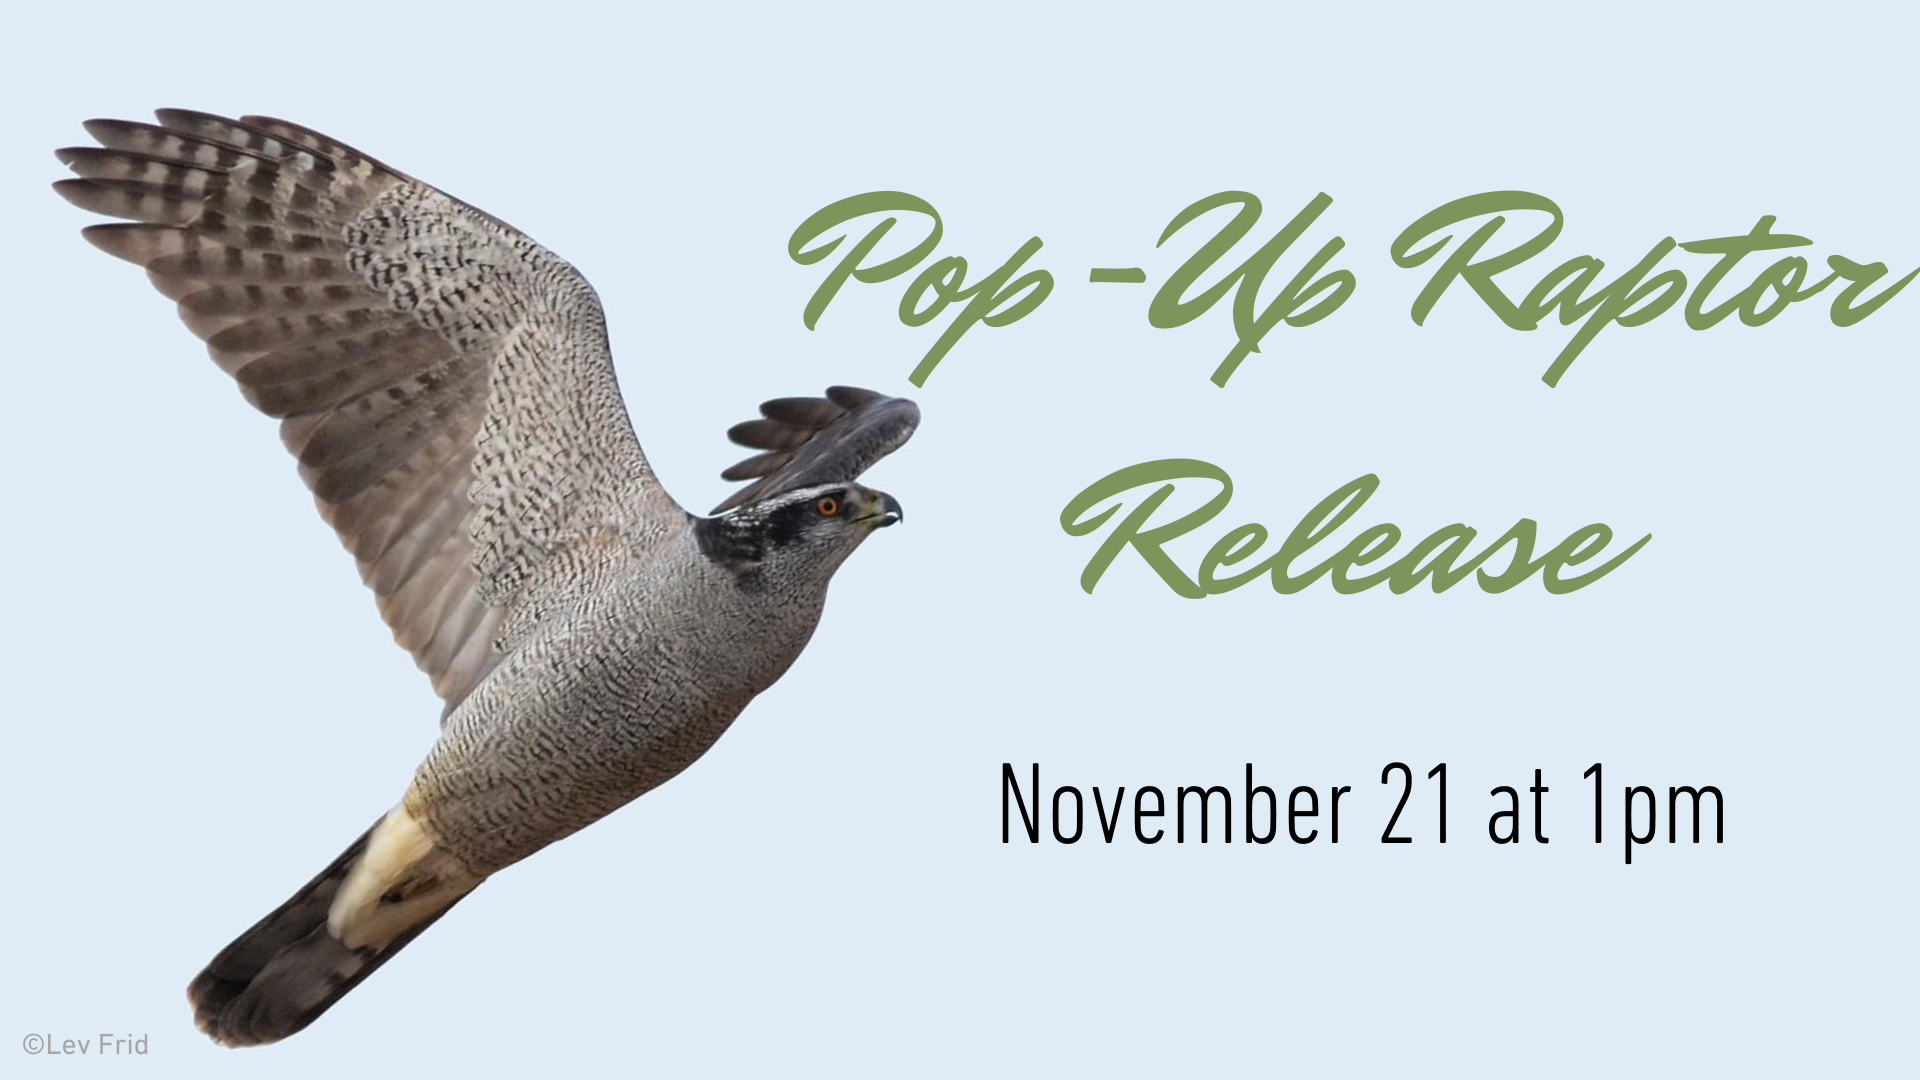 A northern Goshark hawk with the text, "Pop-UP Raptor Release November 21 at 1pm"